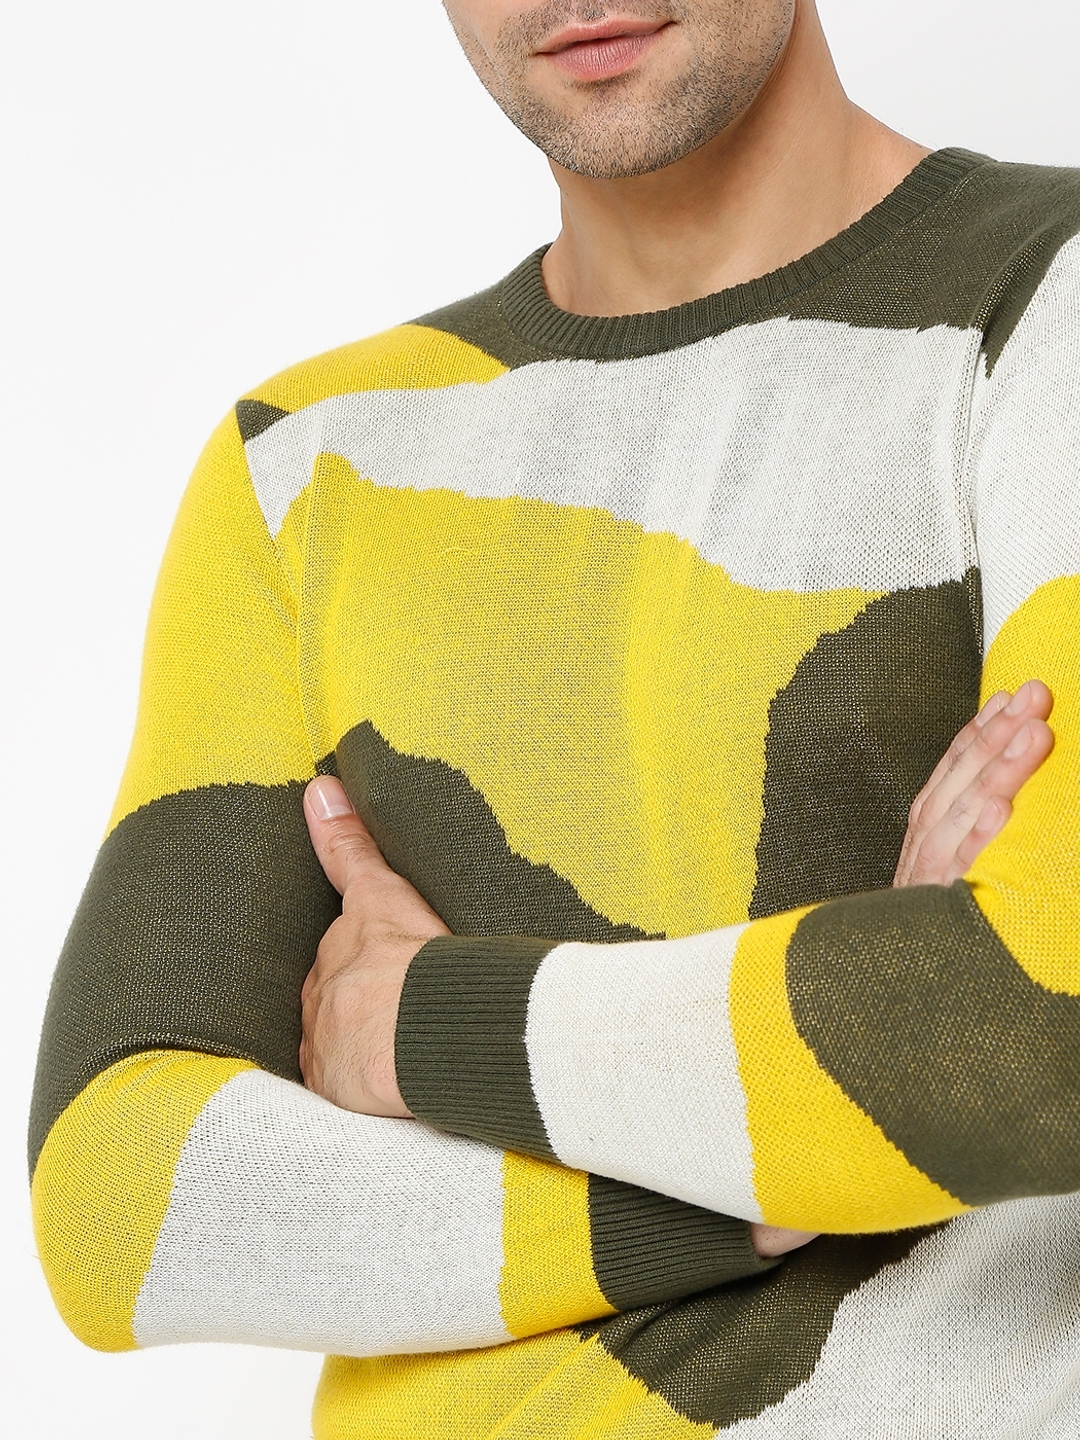 Robin Knitted Slim Fit Sweater